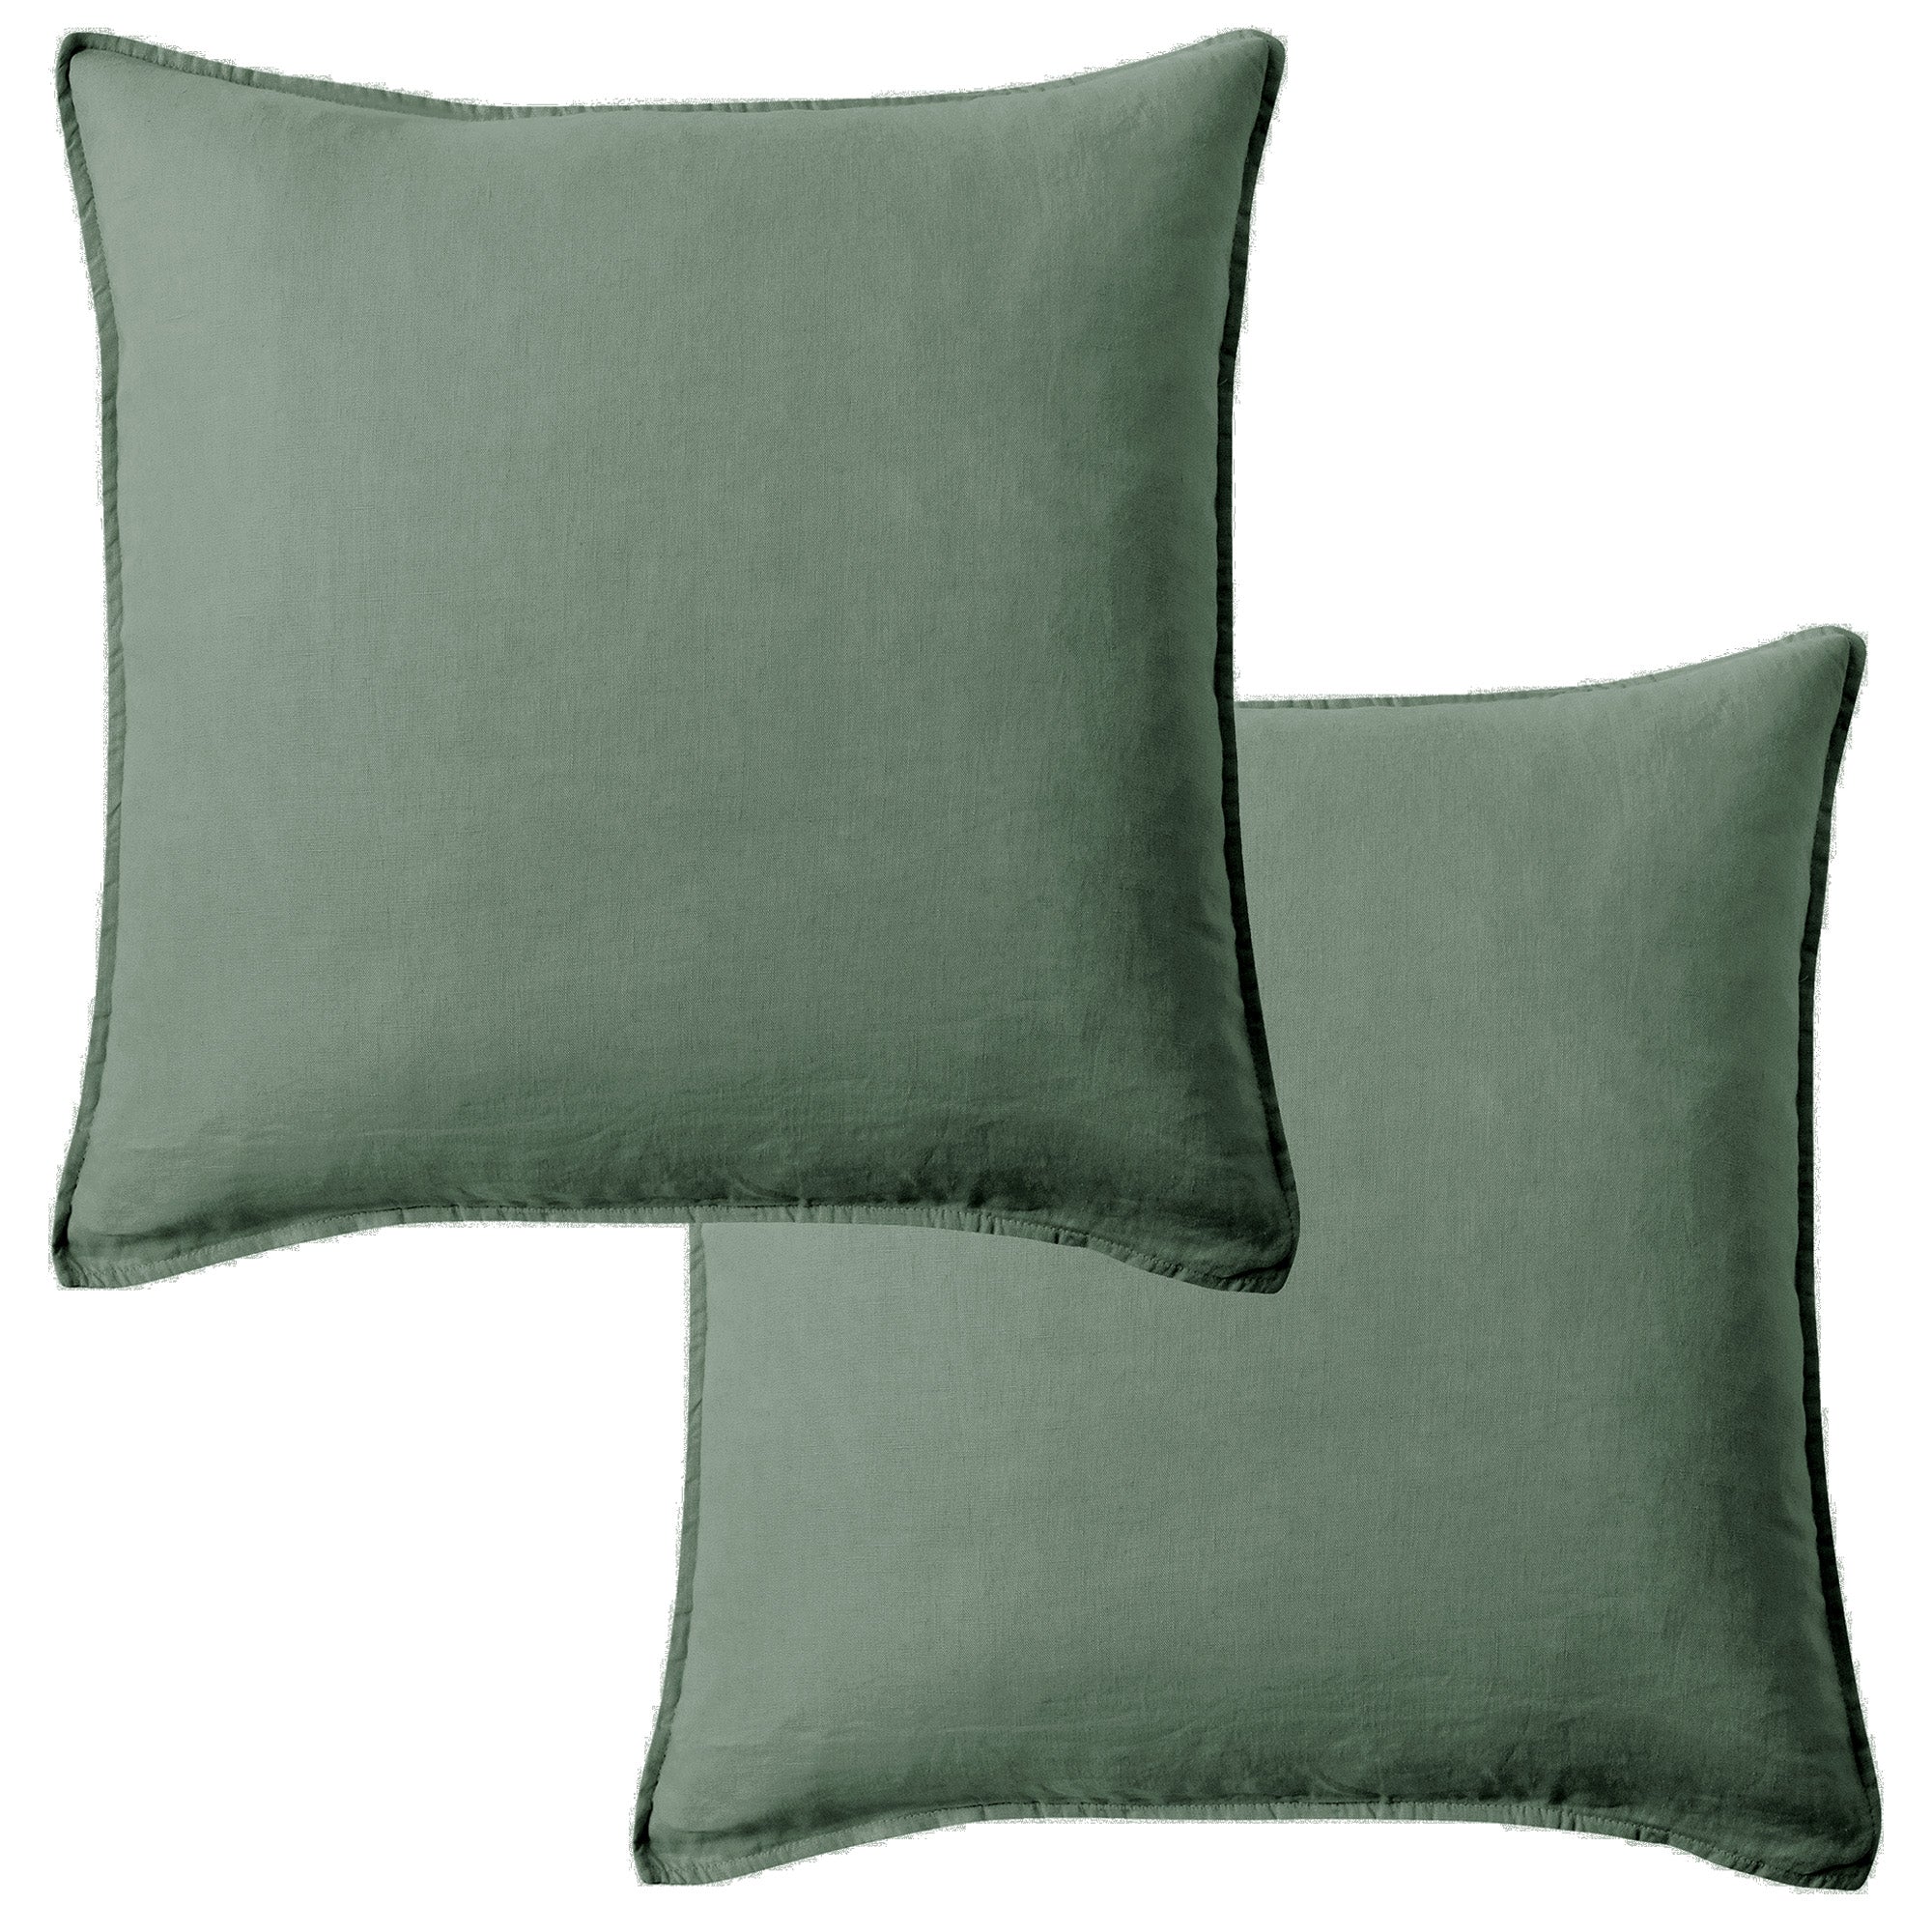 Washed Linen Square Pillow - Set of 2